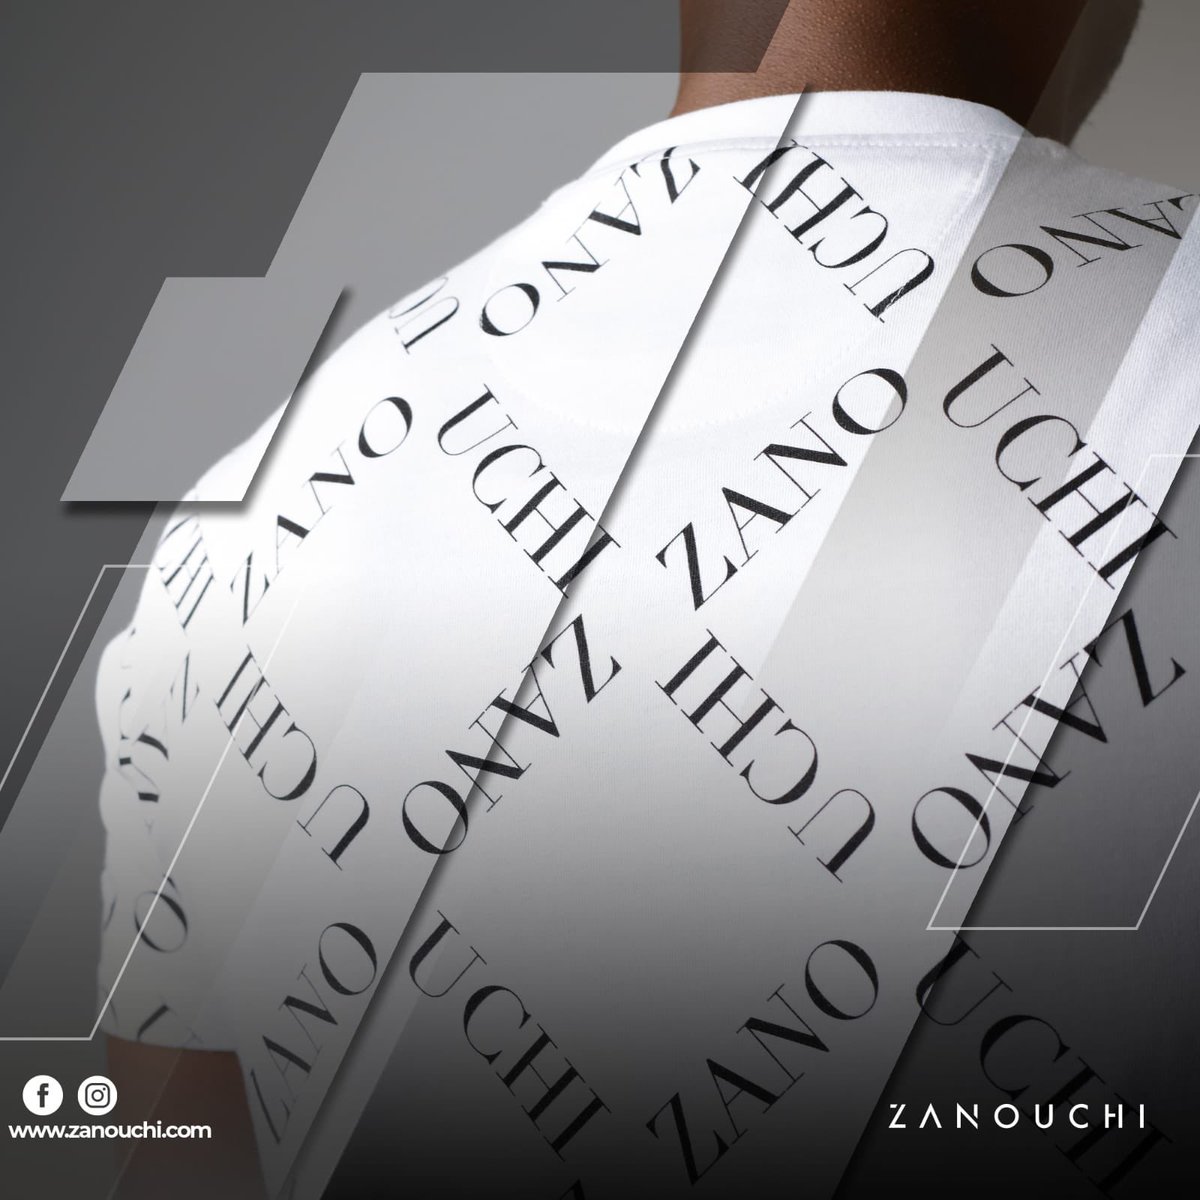 Designs Inspired by uniqueness and to be different. 

Love Fashion Love Zanouchi. 

#fashion #lifestyle #balr #mensfashion #styling #kingstagram #designer #clothing #shoppingaddict #urbanlux #streetstyle #streetluxury #hiphop #photooftheday